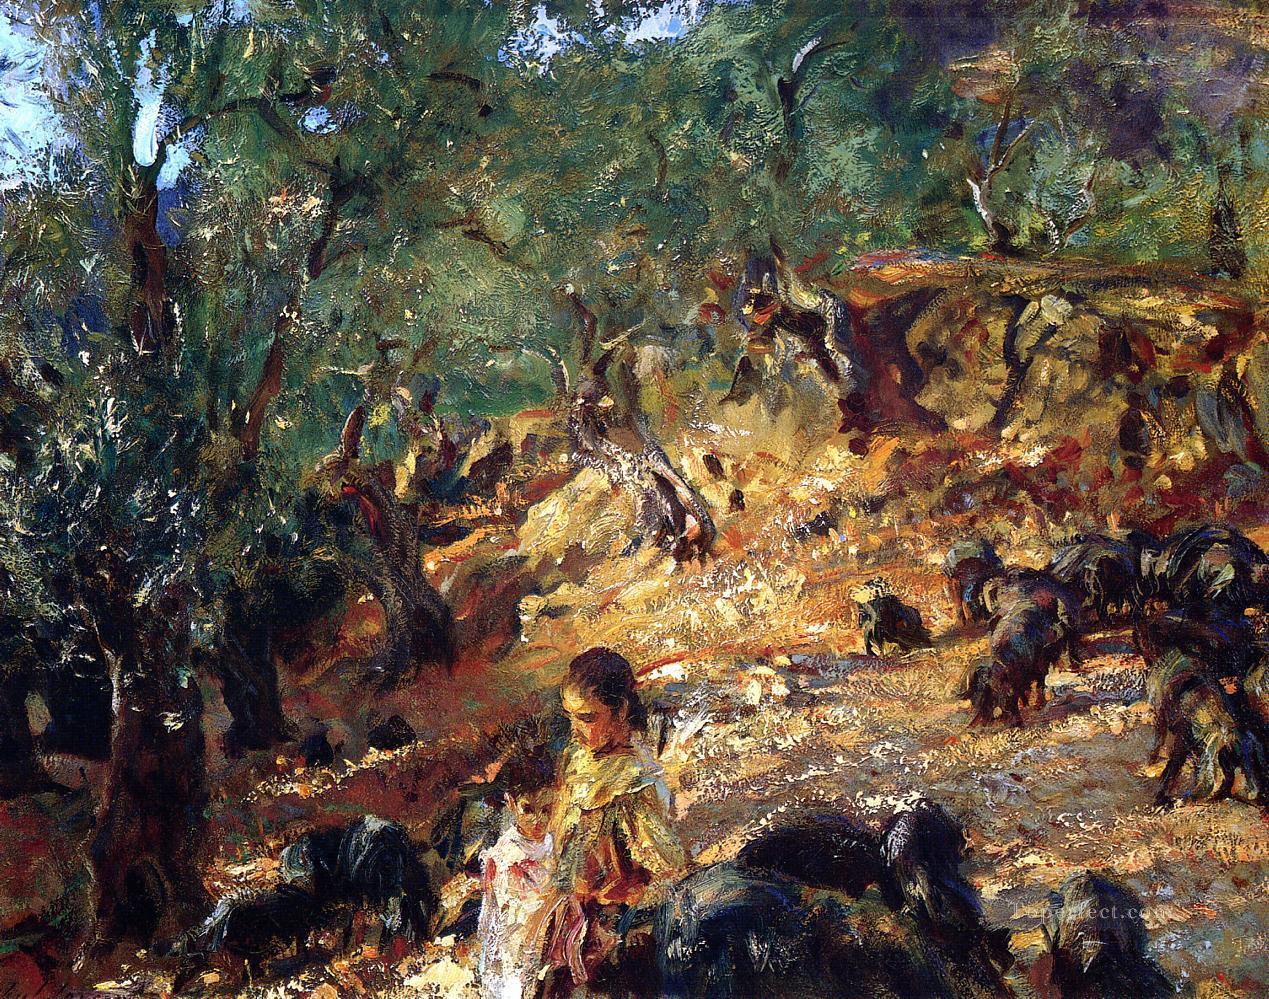 Ilex Wood at Majorca with Blue Pigs John Singer Sargent Oil Paintings